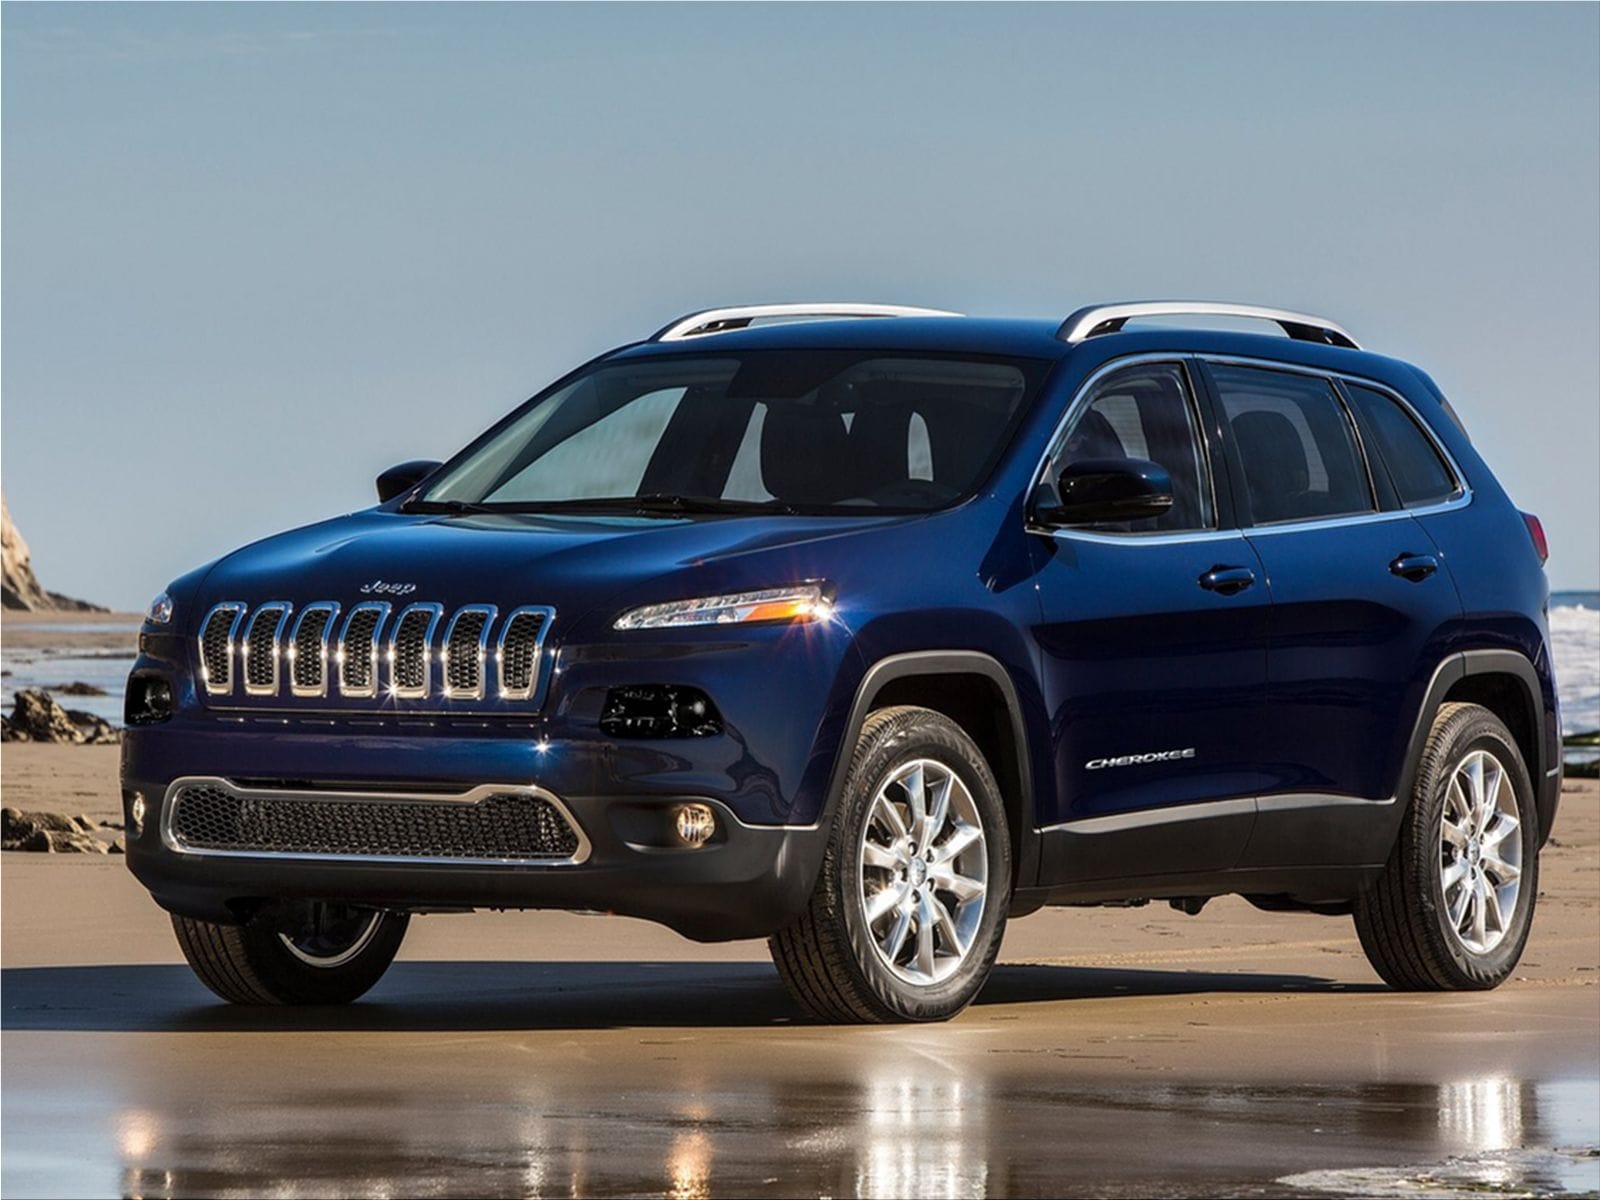 2014 Jeep Cherokee Mid Size Suv Jeep Car Pictures